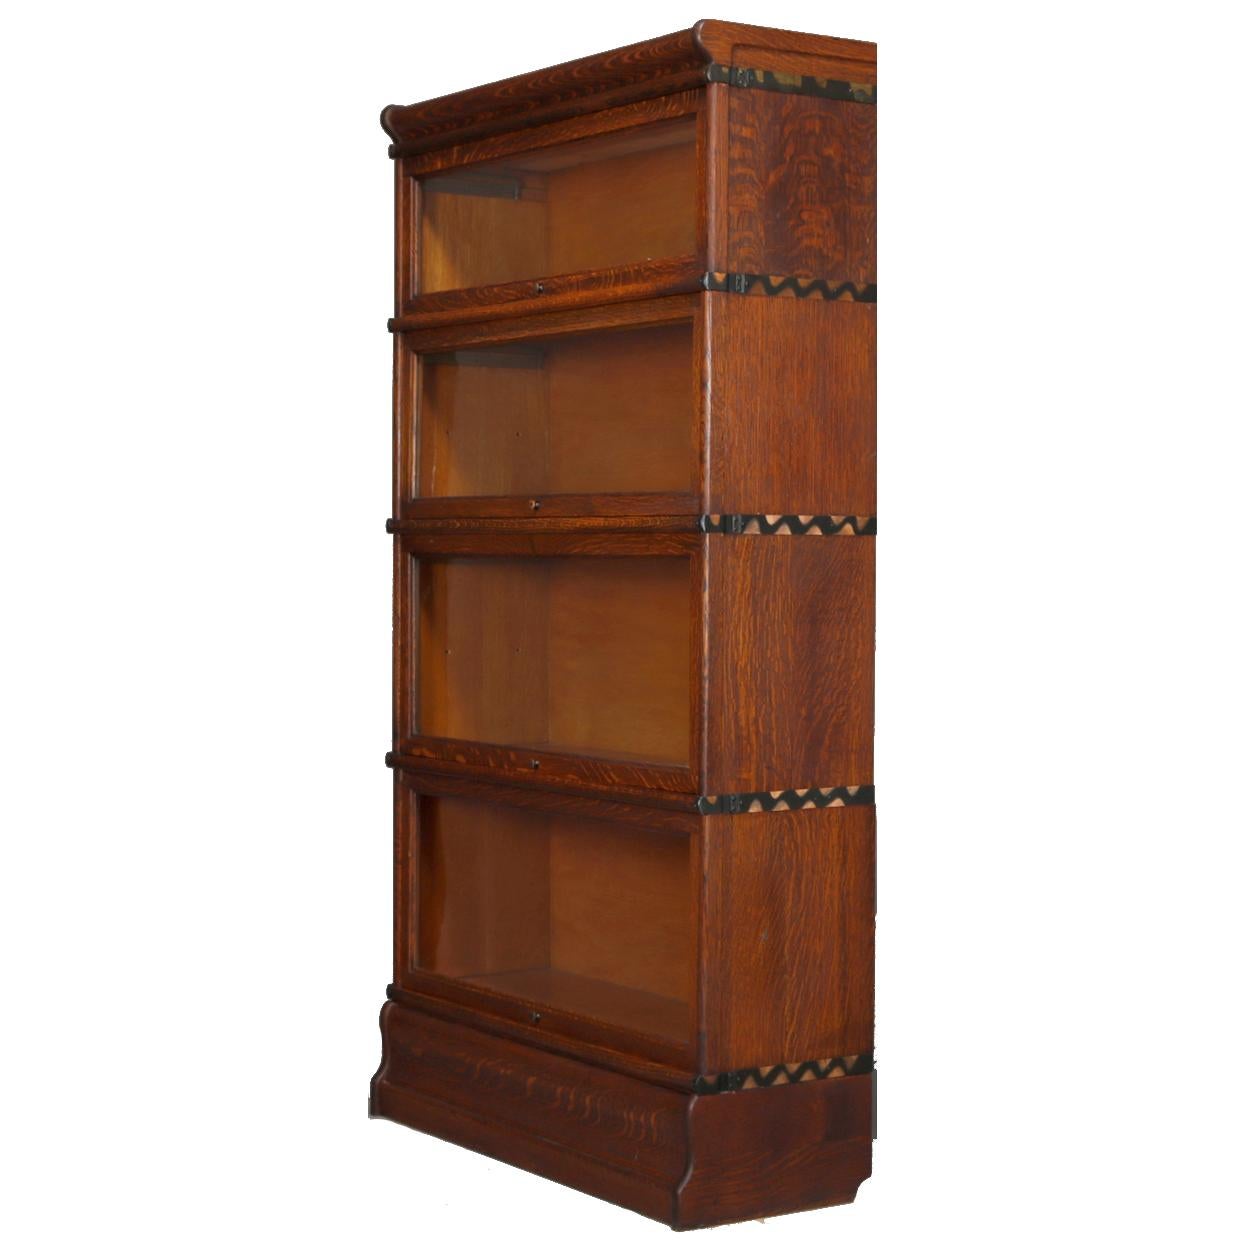 An antique Arts & Crafts Barrister bookcase by Macey offers quarter sawn oak construction with four stacks having pull out glass doors, original maker stamp as photographed, circa 1910.

Measures: 61.5